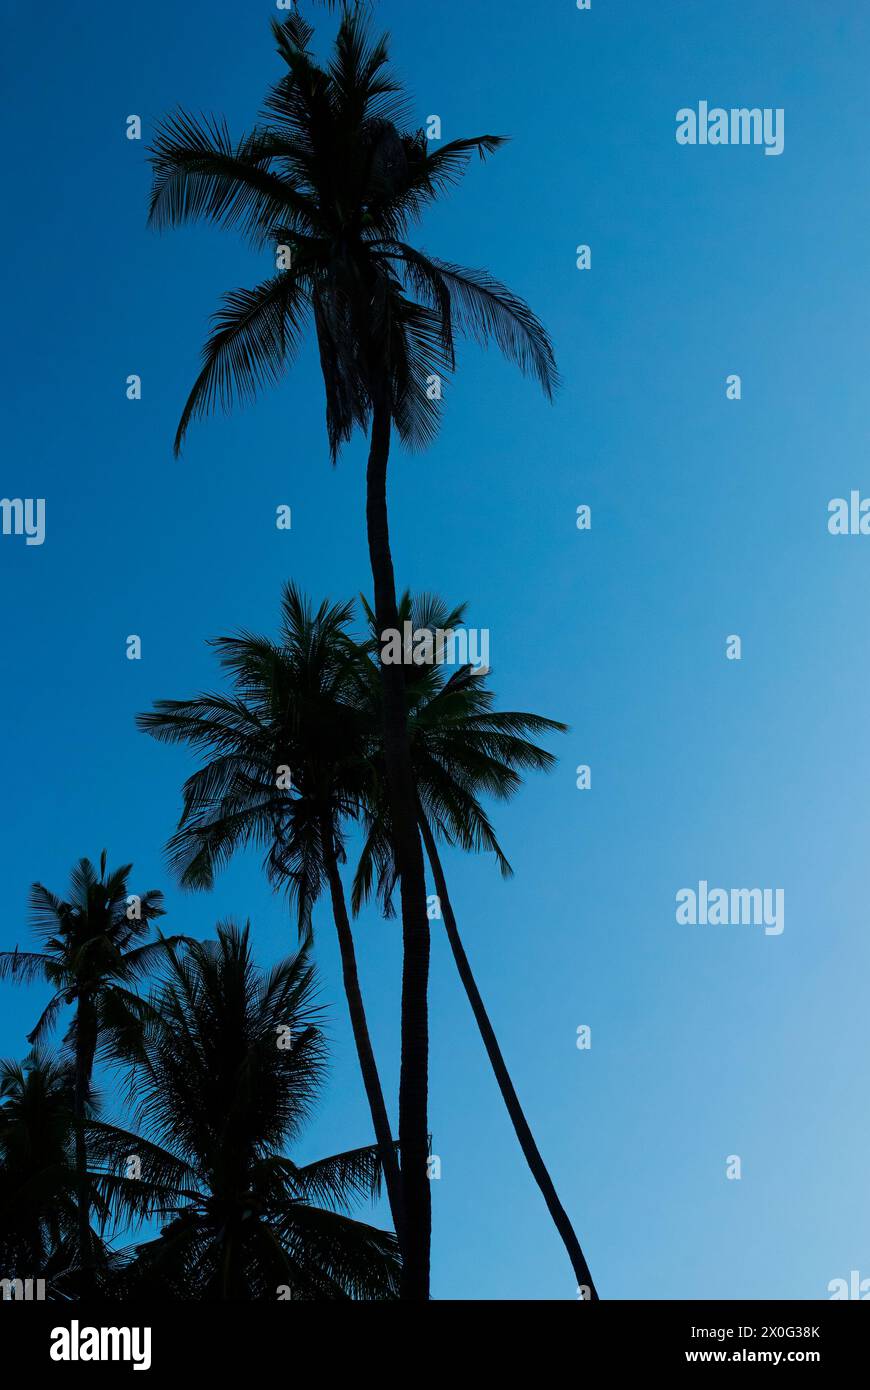 Silhouette of coconut trees at blue hour dusk Stock Photo